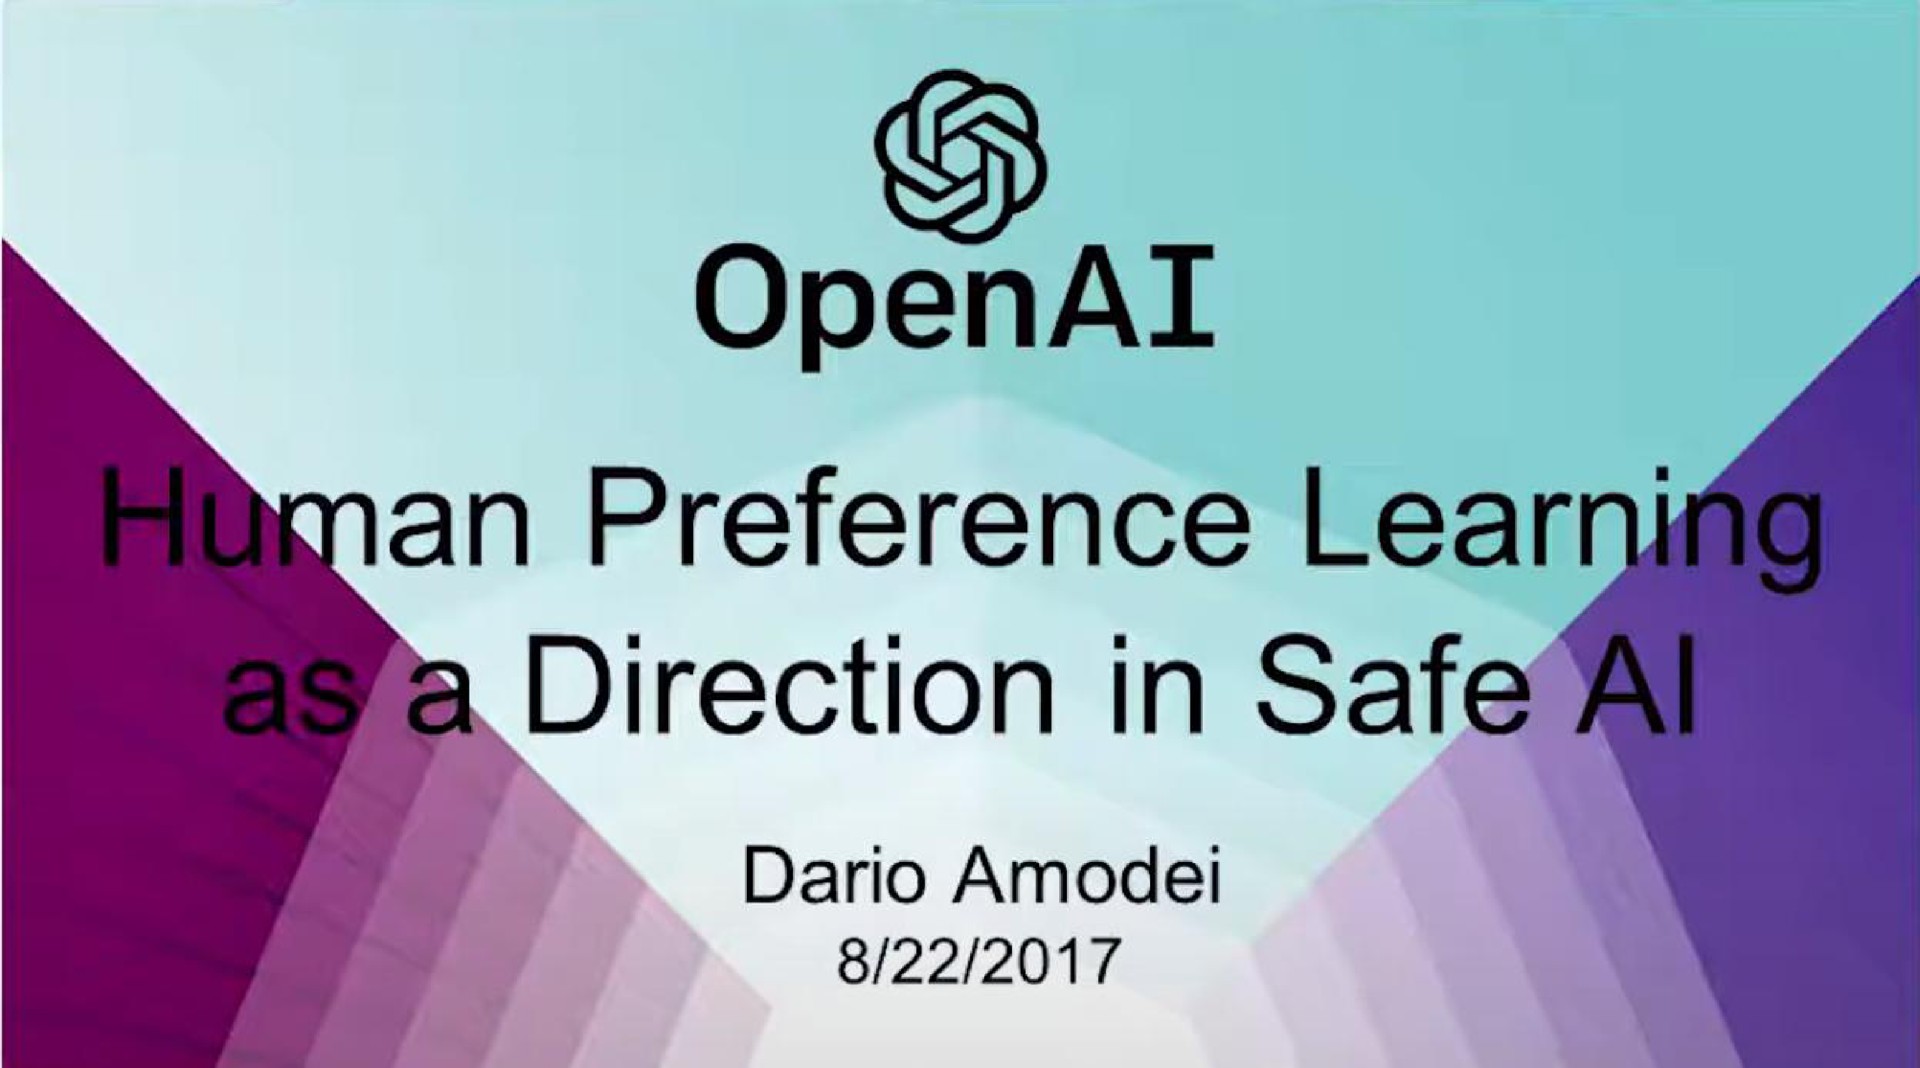 an preference learn direction in safe | OpenAI